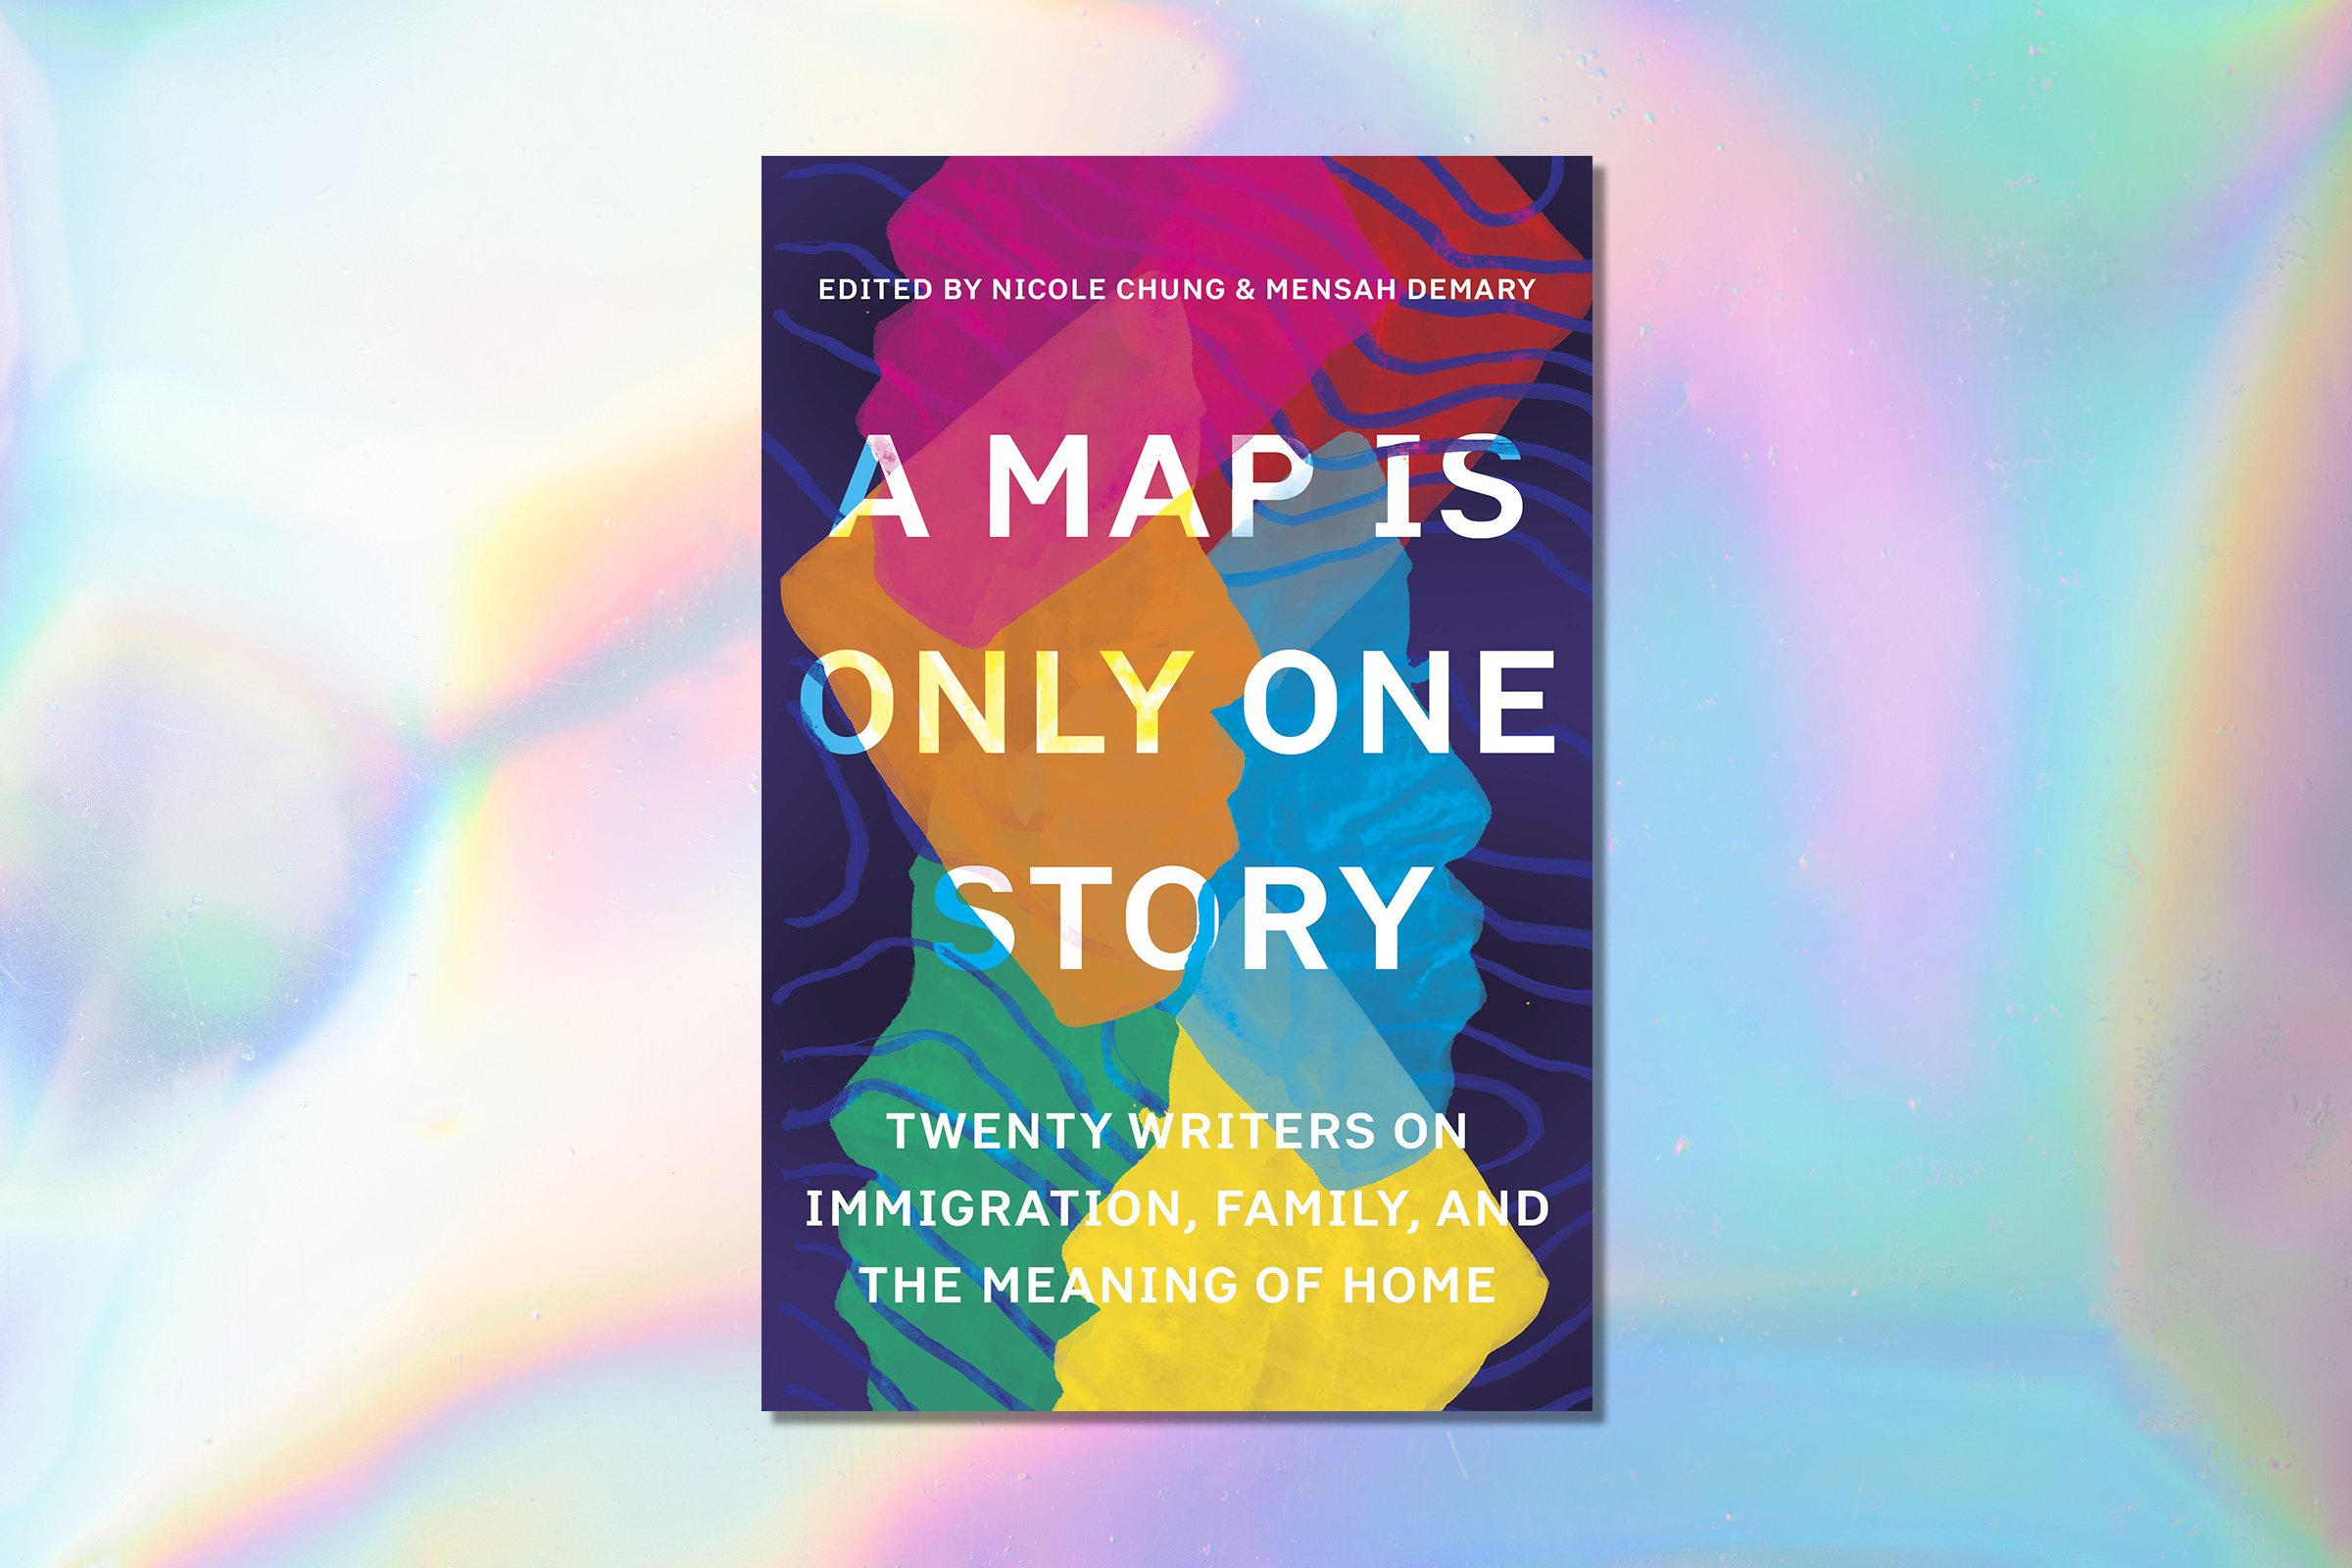 Nicole Chung and Mensah Demary (Editors), A Map Is Only One Story: Twenty Writers on Immigration, Family, and the Meaning of Home